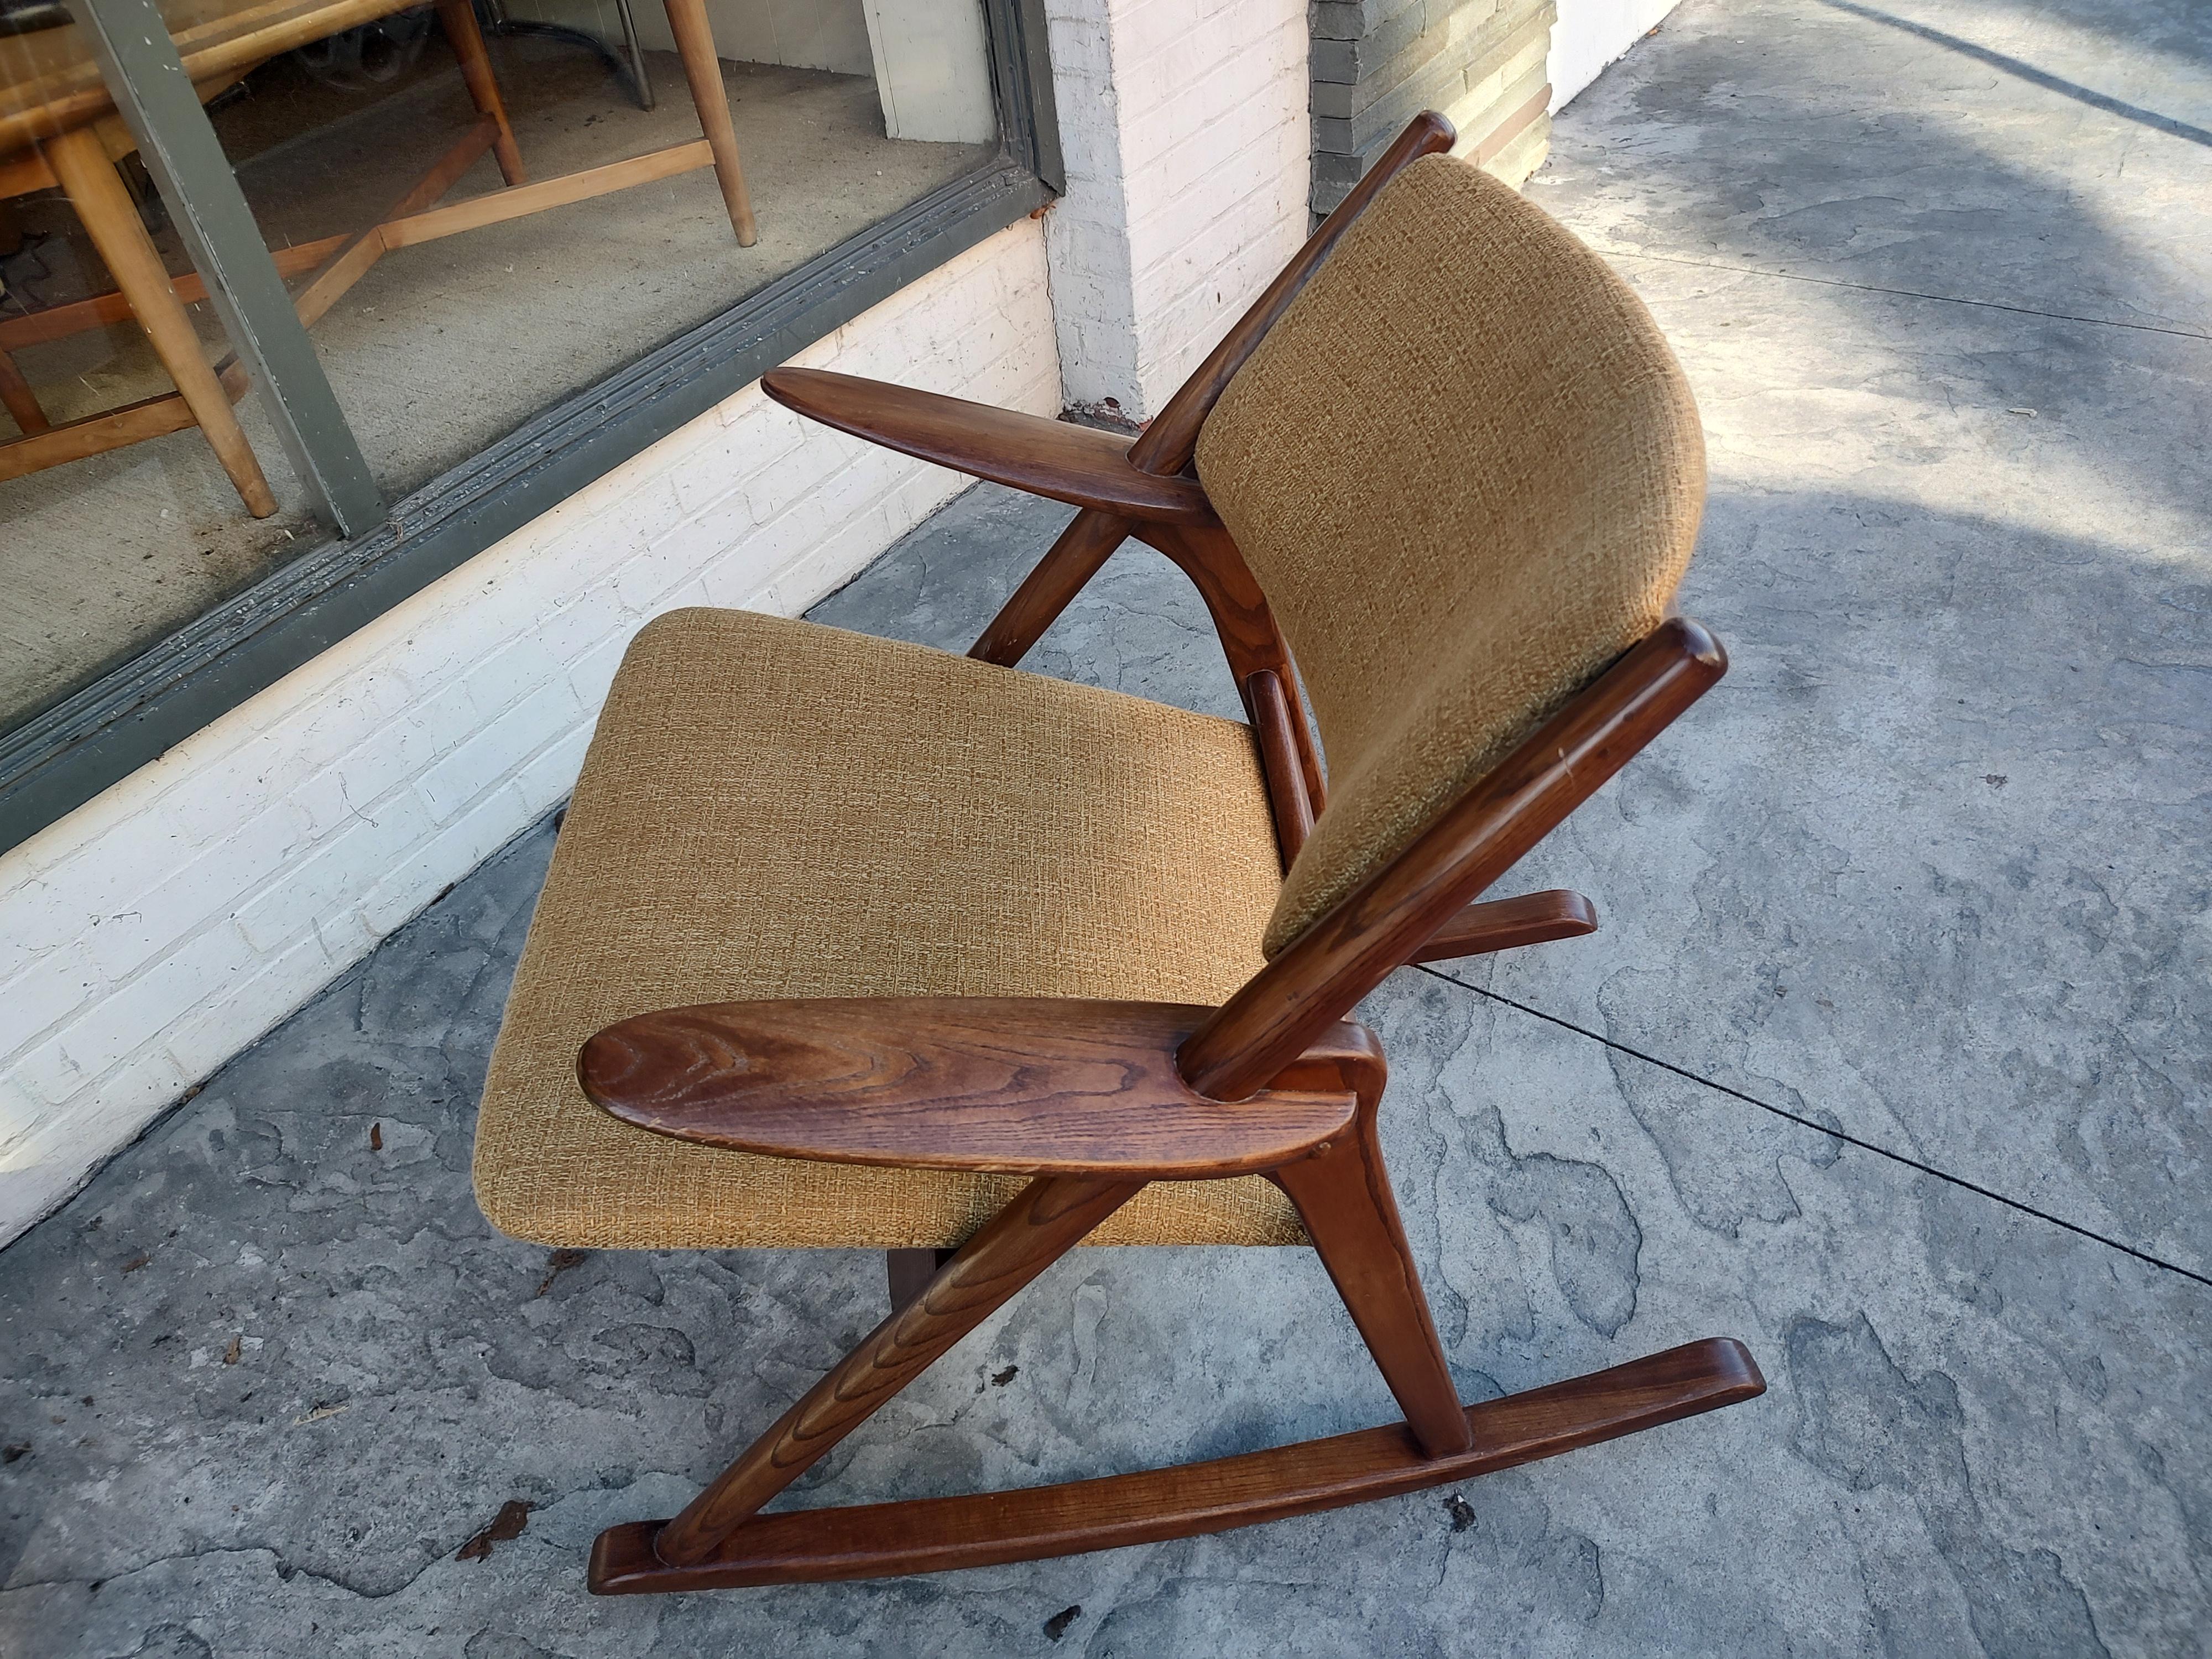 Fabulous teak rocker attributed to Frank Reenskaug with a generous seating area newly reupholstered. Beautiful and wide sculpted paddle arms along with an A Frame design set this rocker apart. Very comfy too! In excellent vintage condition with